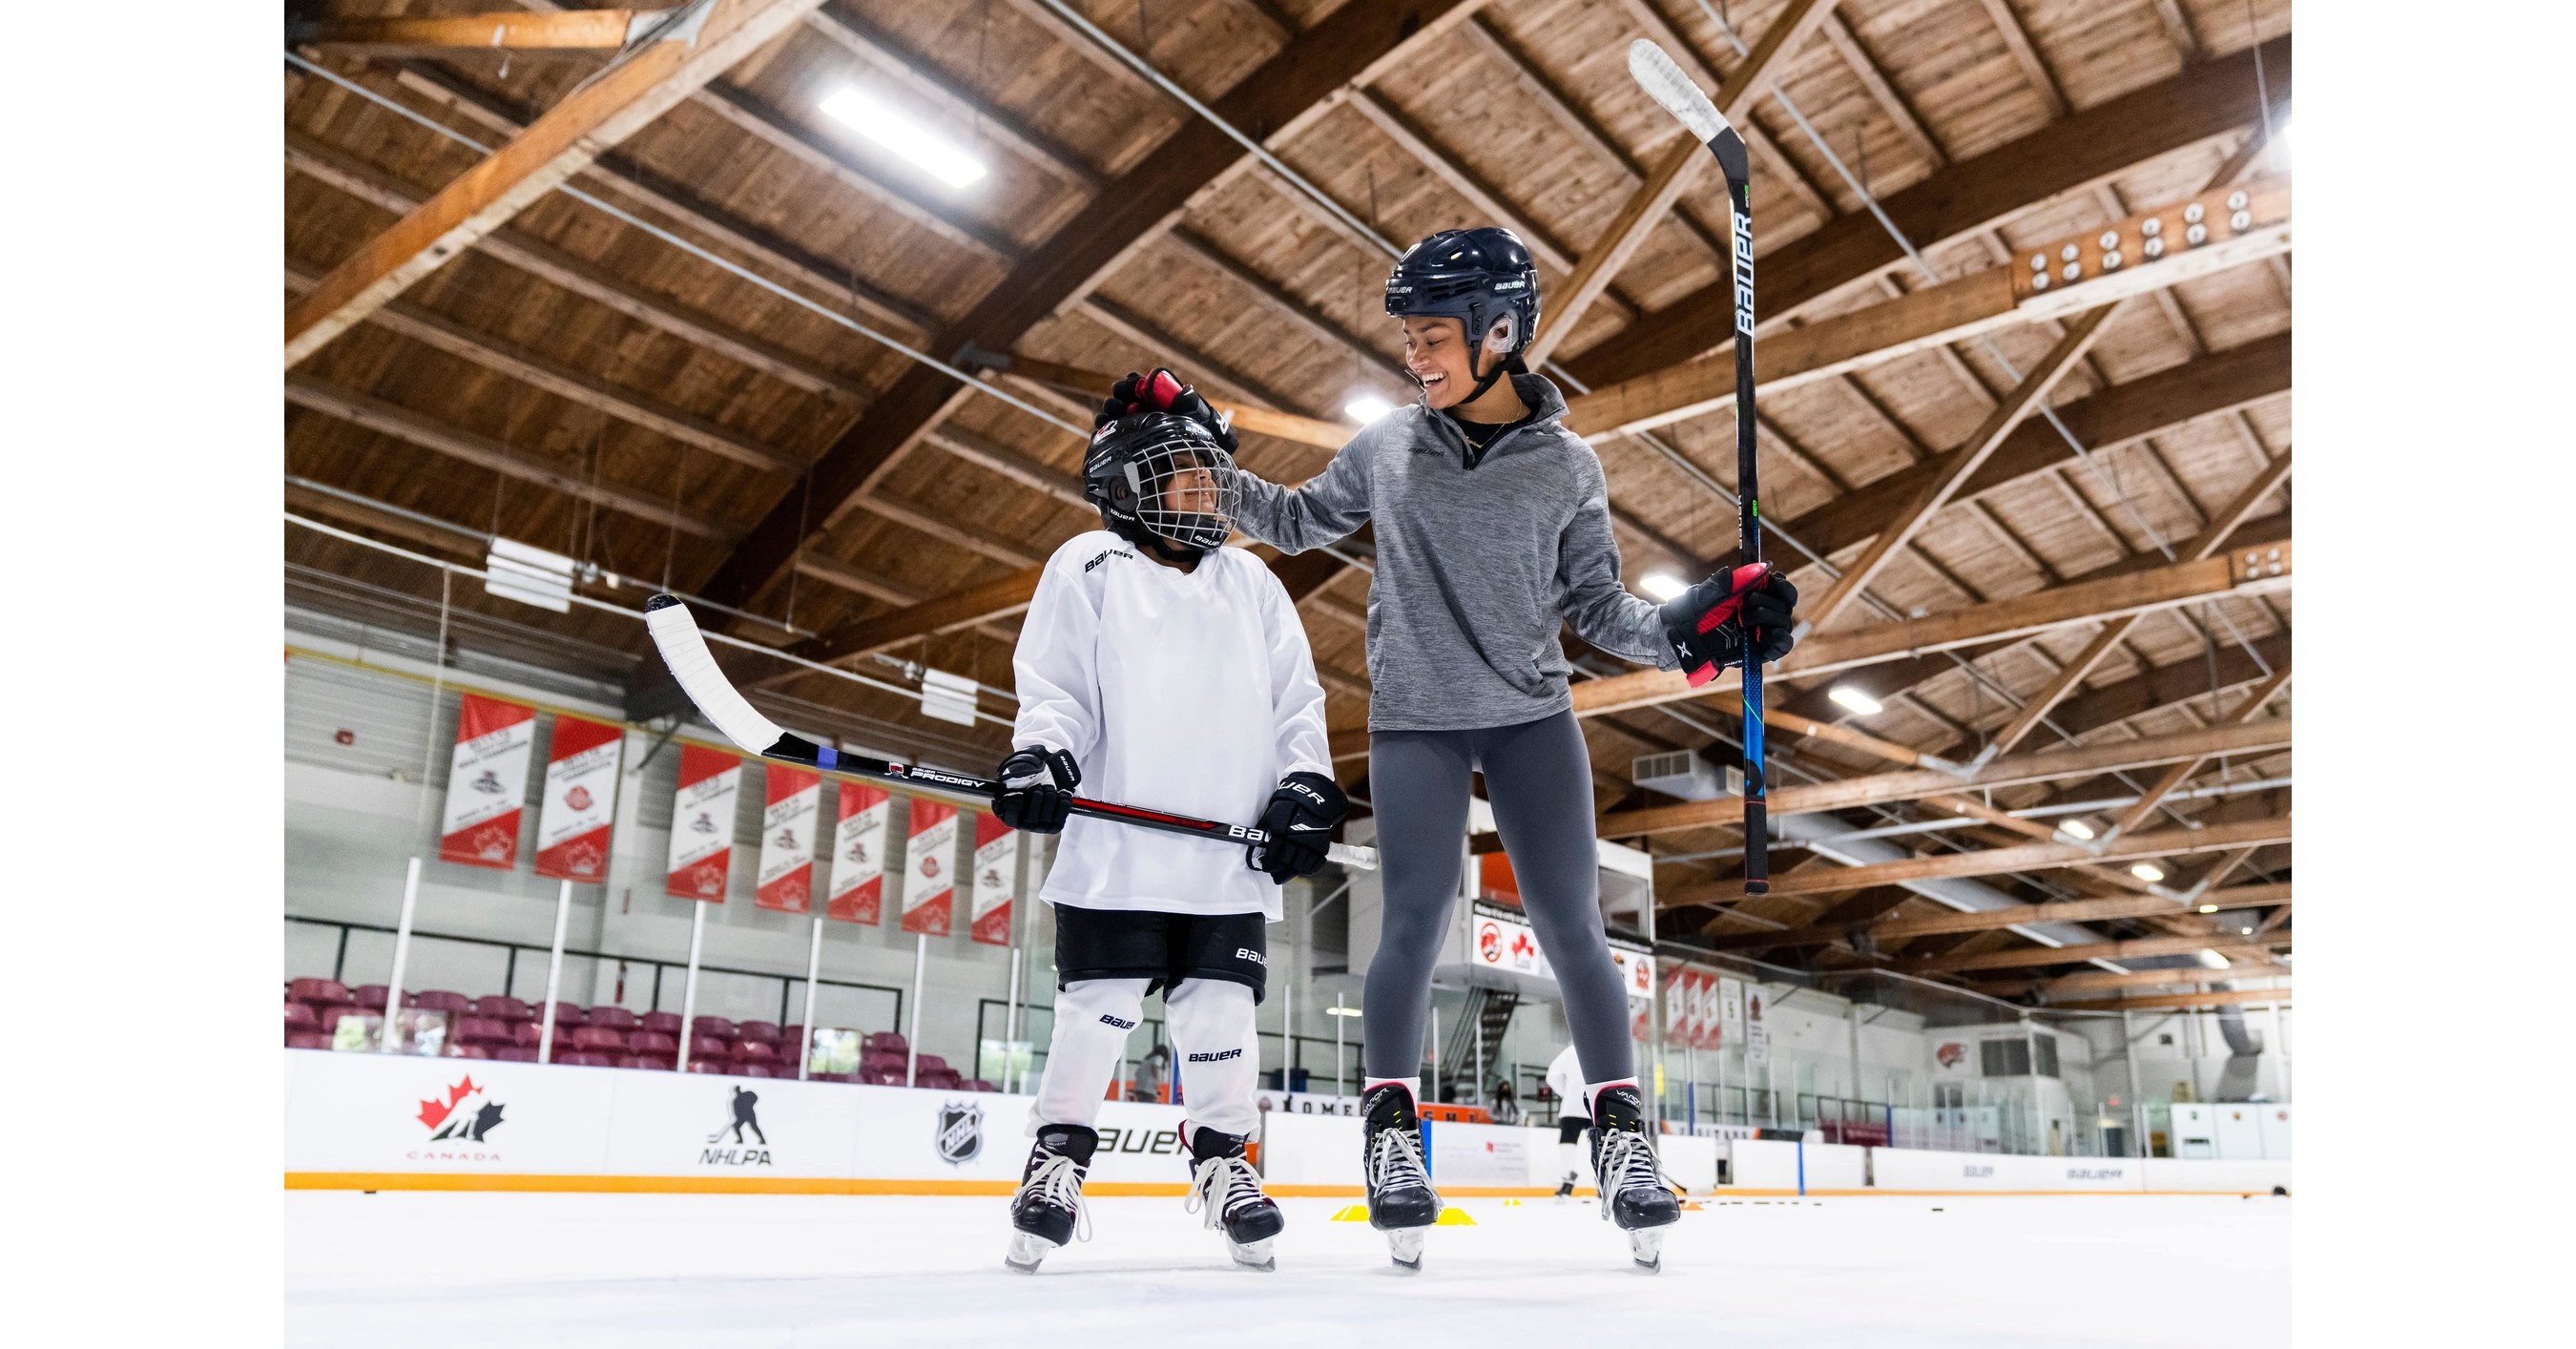 Bauer Hockey - An ocean of possibilities with Bauer